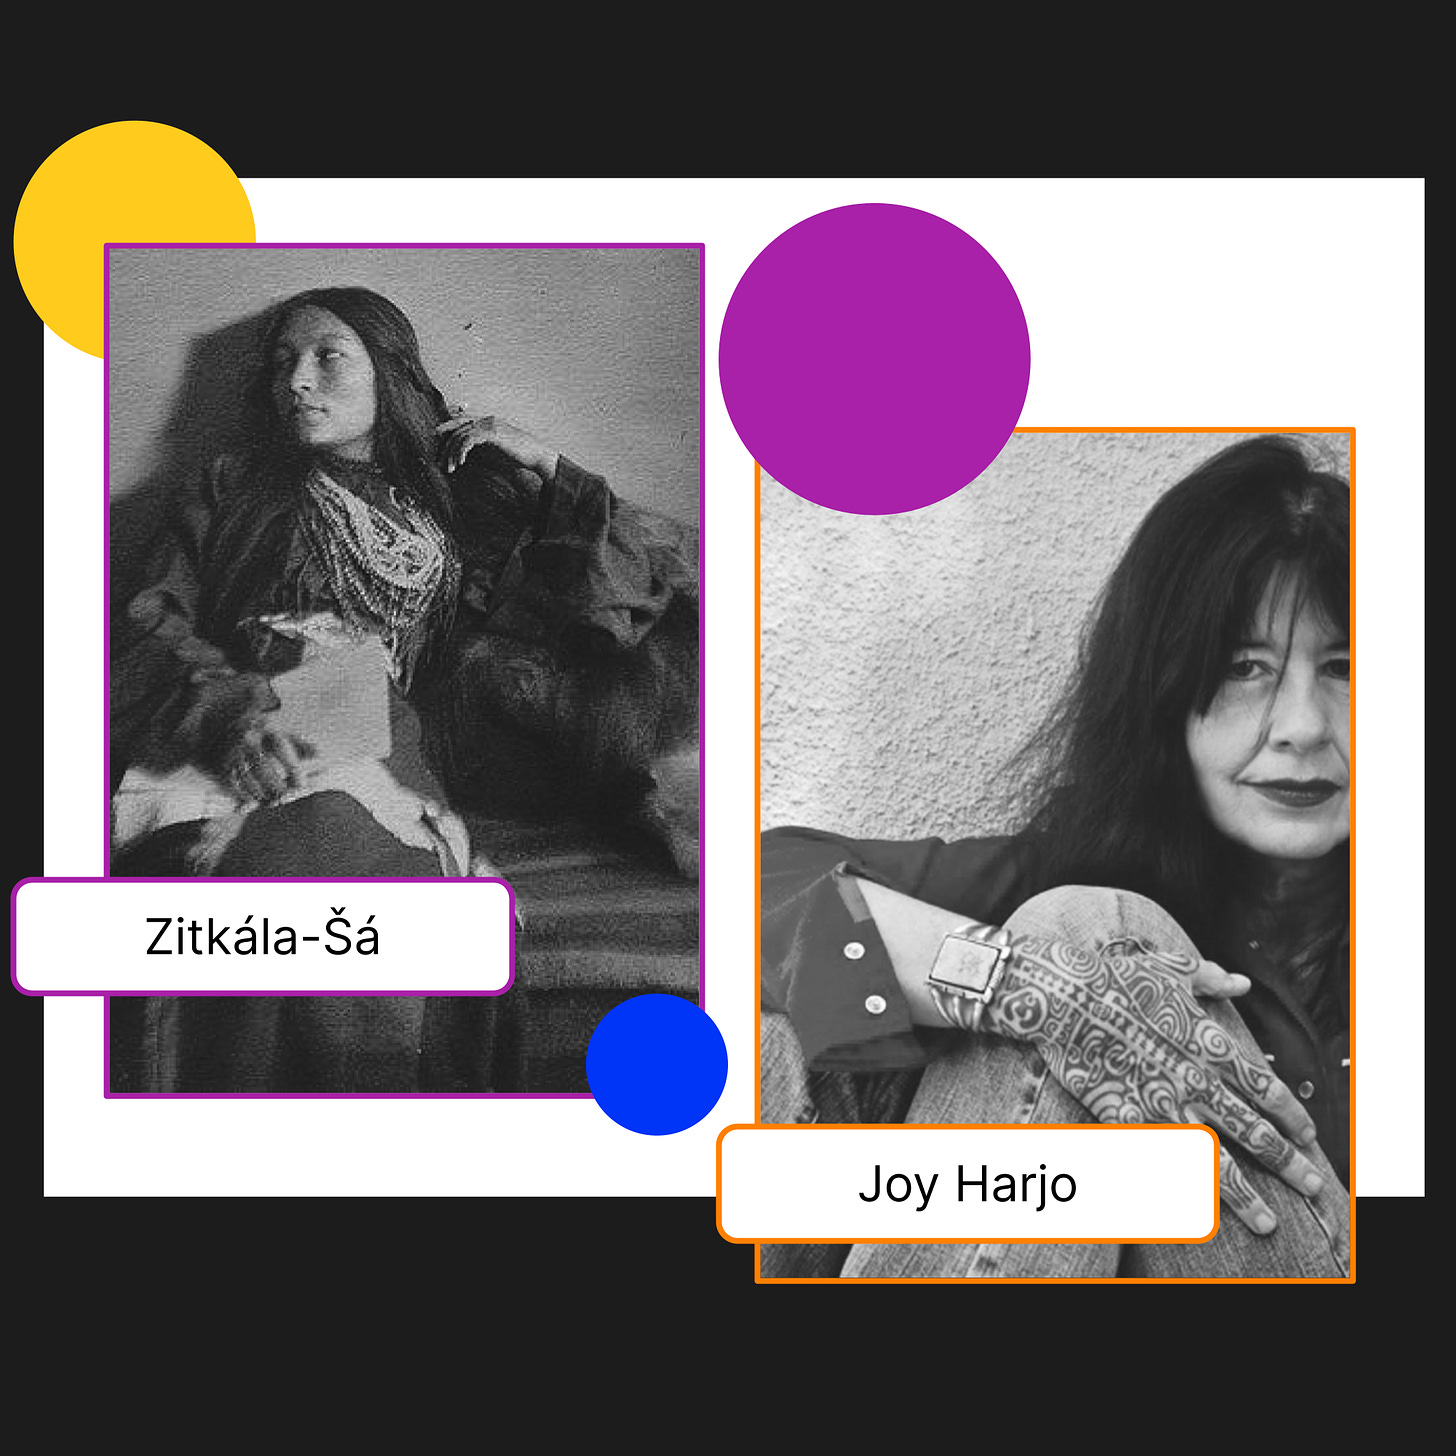 (left) An old black-and-white photo of Zitkala-Sa, a young American Indian woman with long dark hair and many beaded necklaces leaning against a bench and wall; (right) a contemporary photo of Joy Harjo, an American Indian woman with dark hair, bangs, and dark lipstick leaning against a wall. She wears a silver cuff bracelet and henna on her hand. 